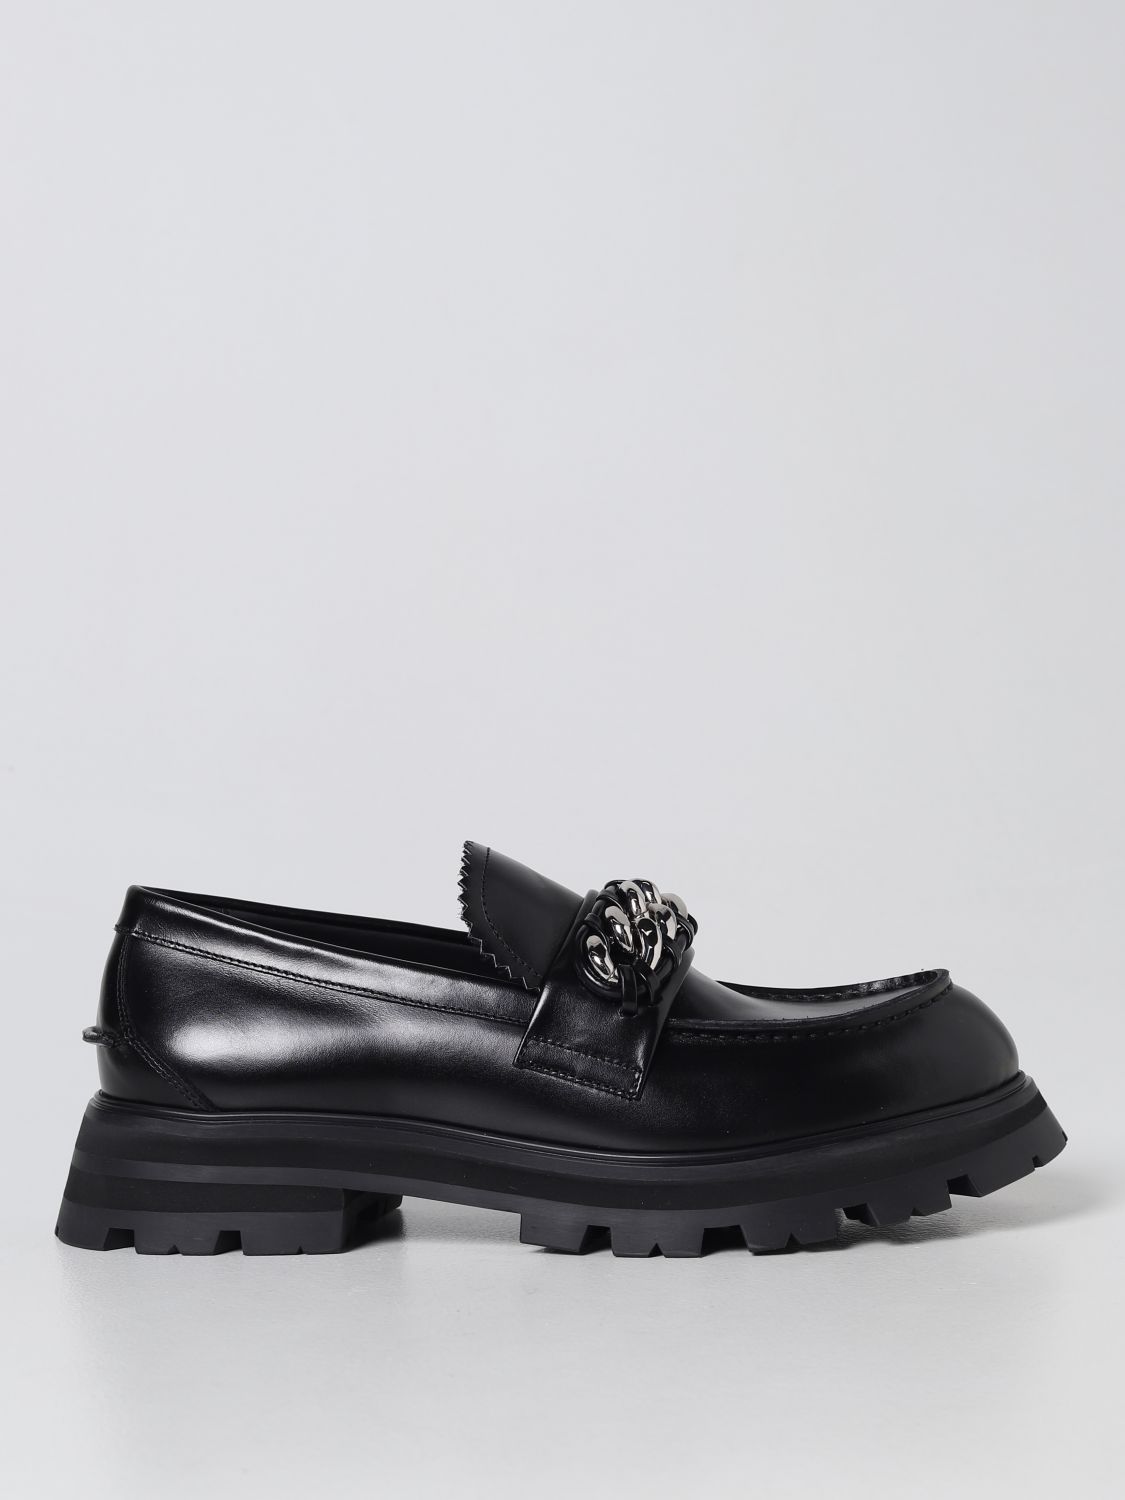 ALEXANDER loafer leather - Black | Alexander Mcqueen loafers 727821WHSWG on GIGLIO.COM